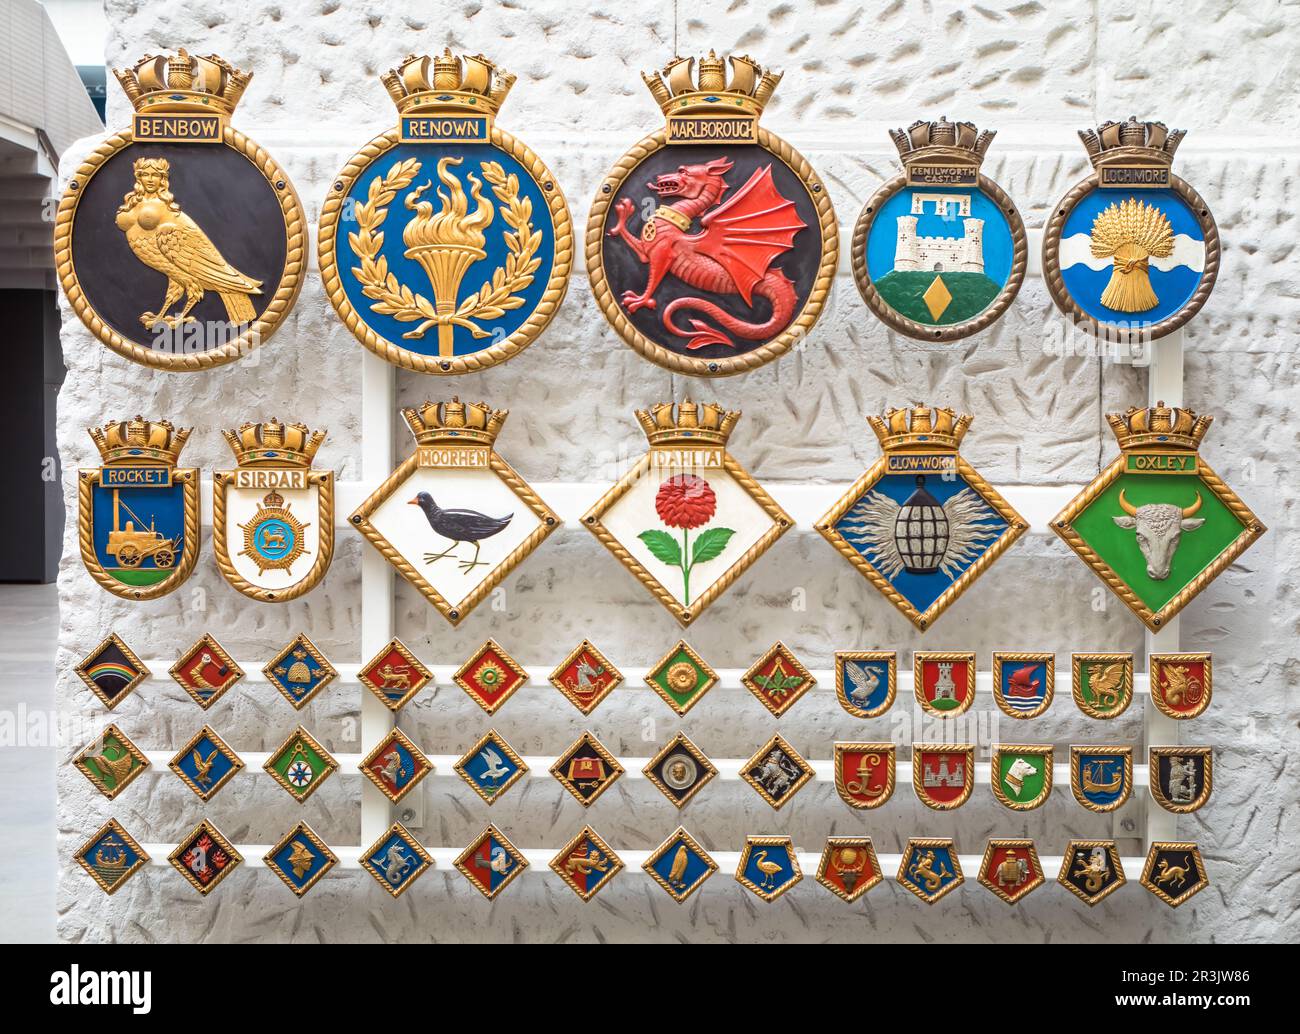 A display of Royal Navy ship's badges in the National Maritime Museum, in Greenwich, London, UK. The intricate designs with vibrant colours are proud Stock Photo